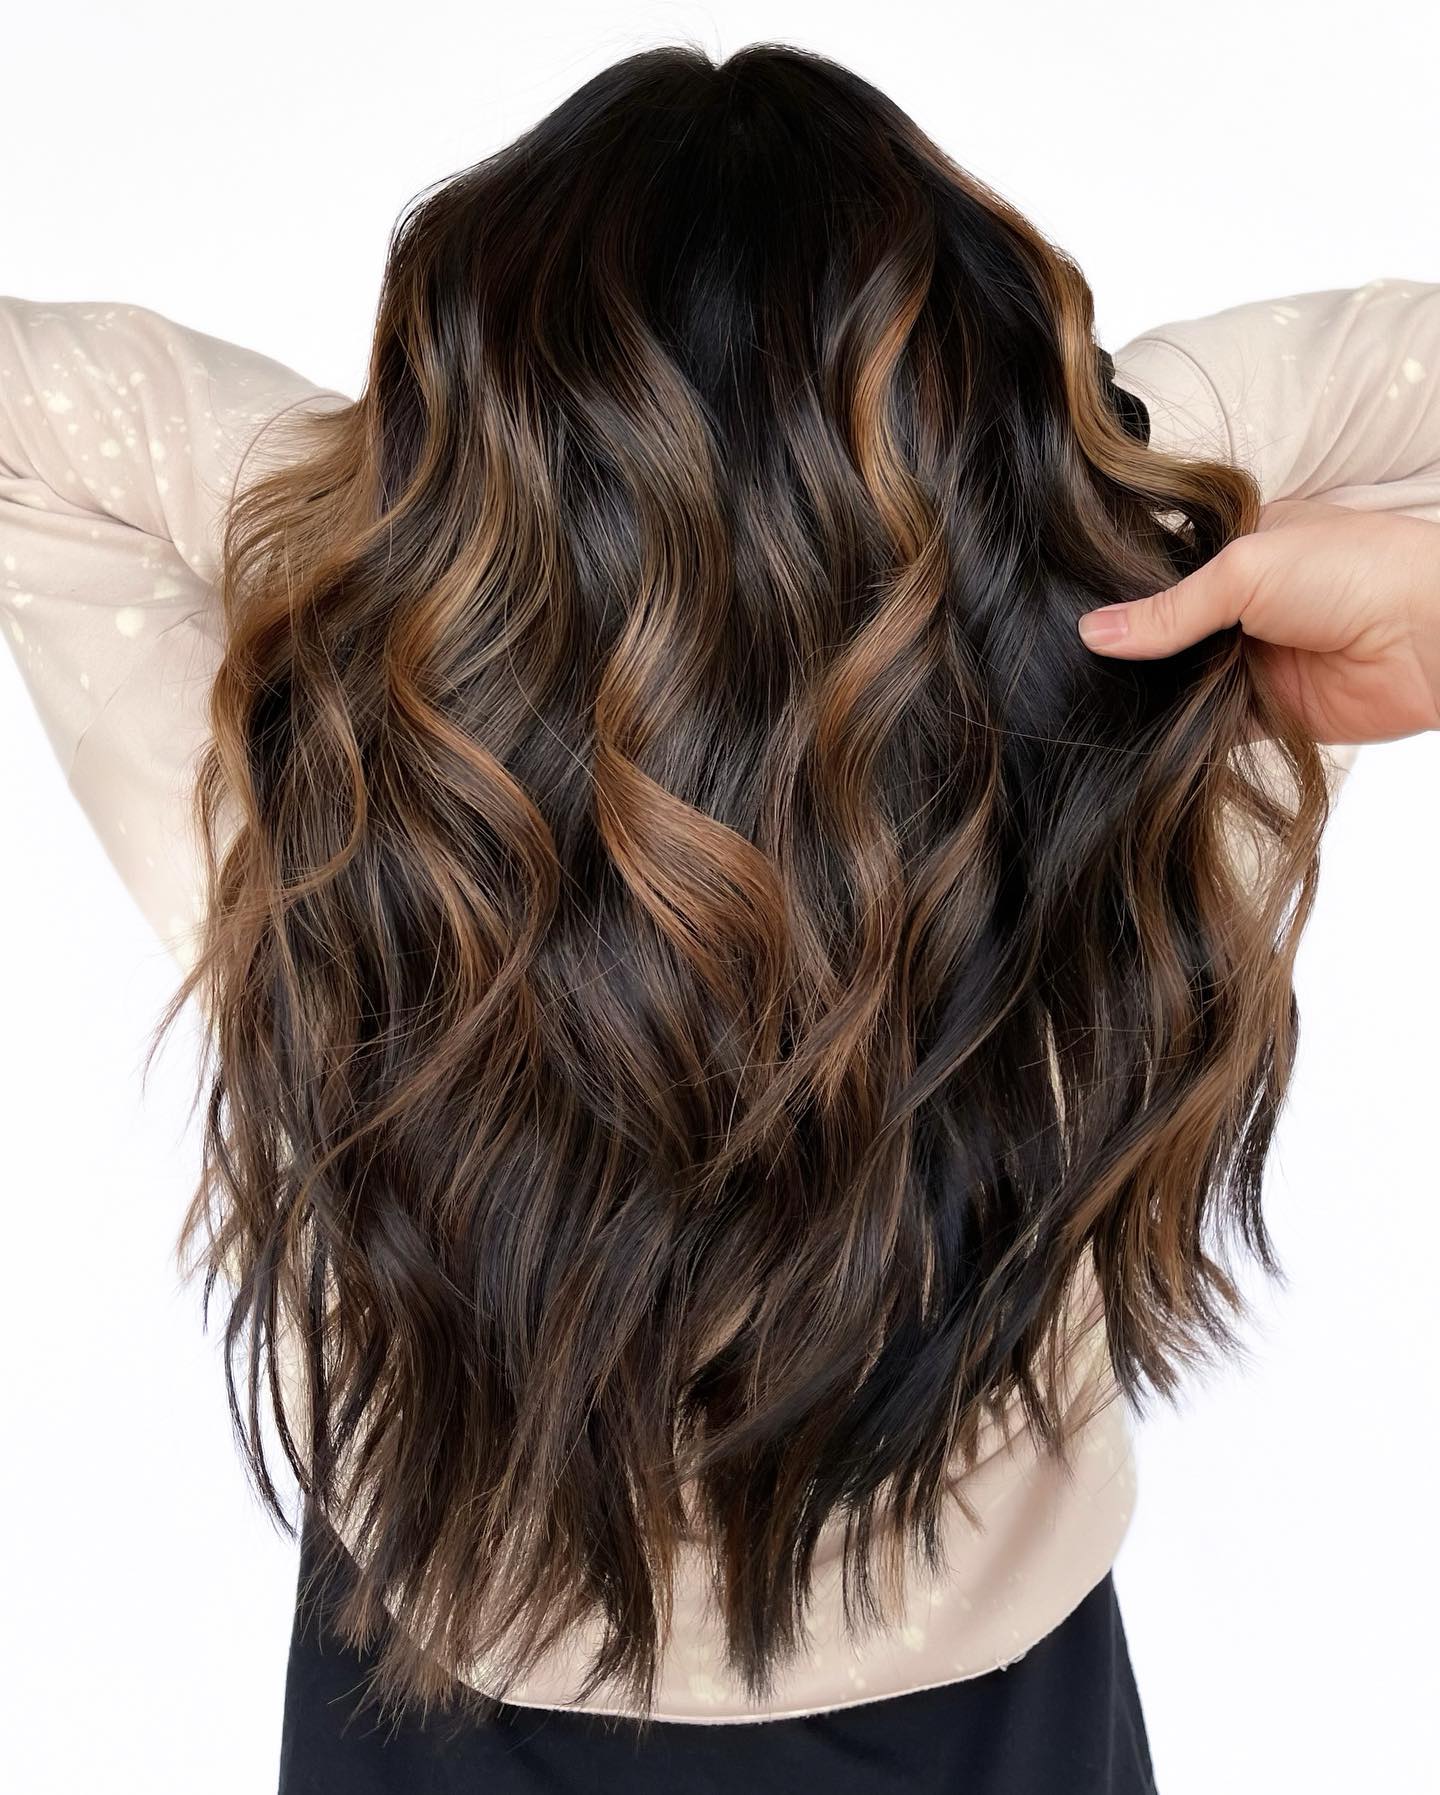 Highlights and Lowlights on Long Wavy Brown Hair